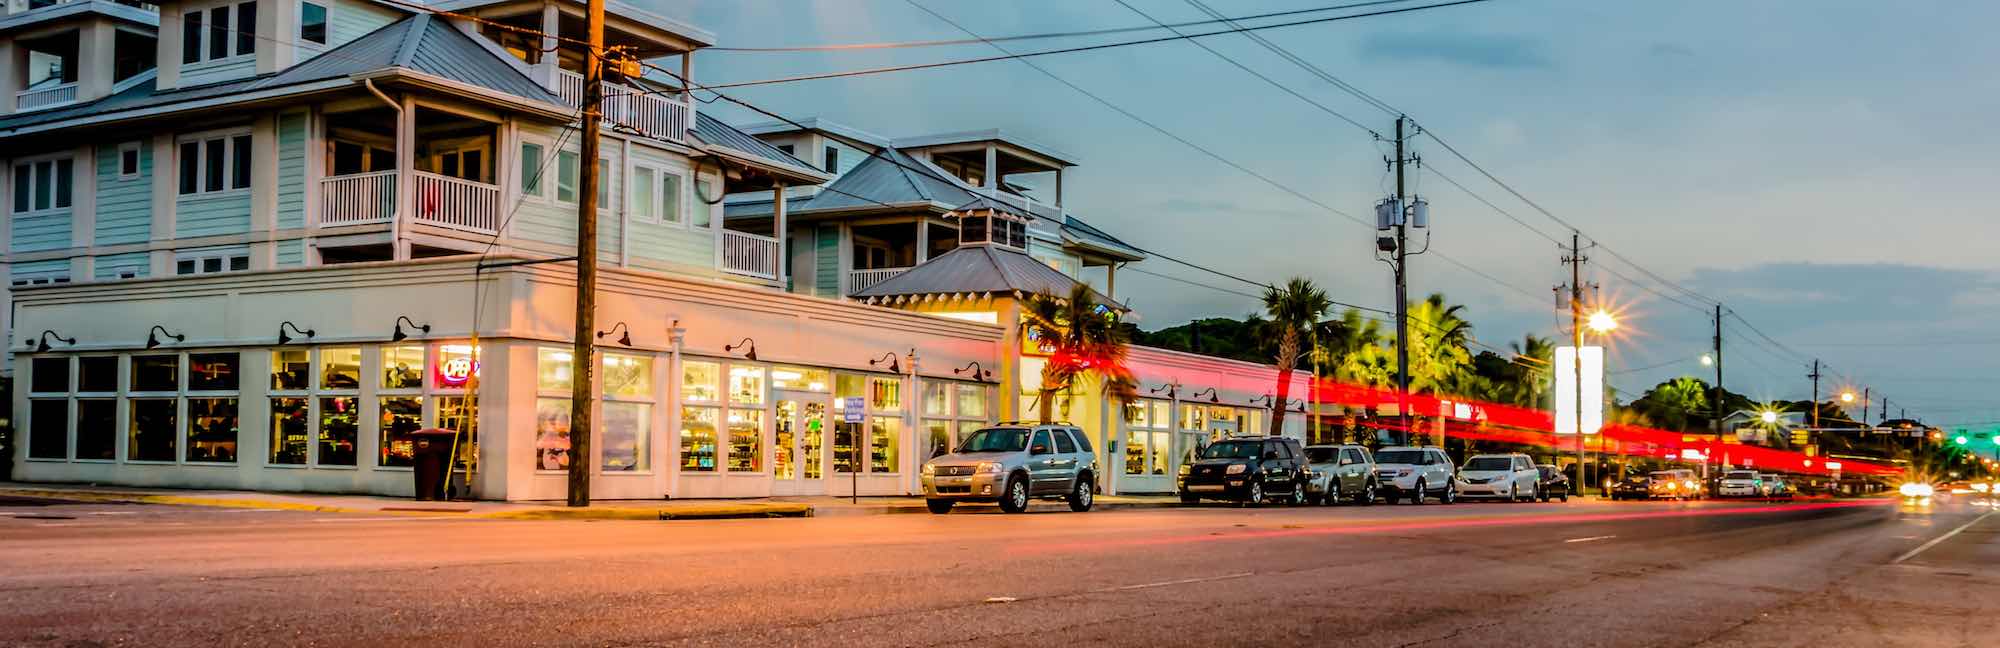 Tybee Island Events for 2020